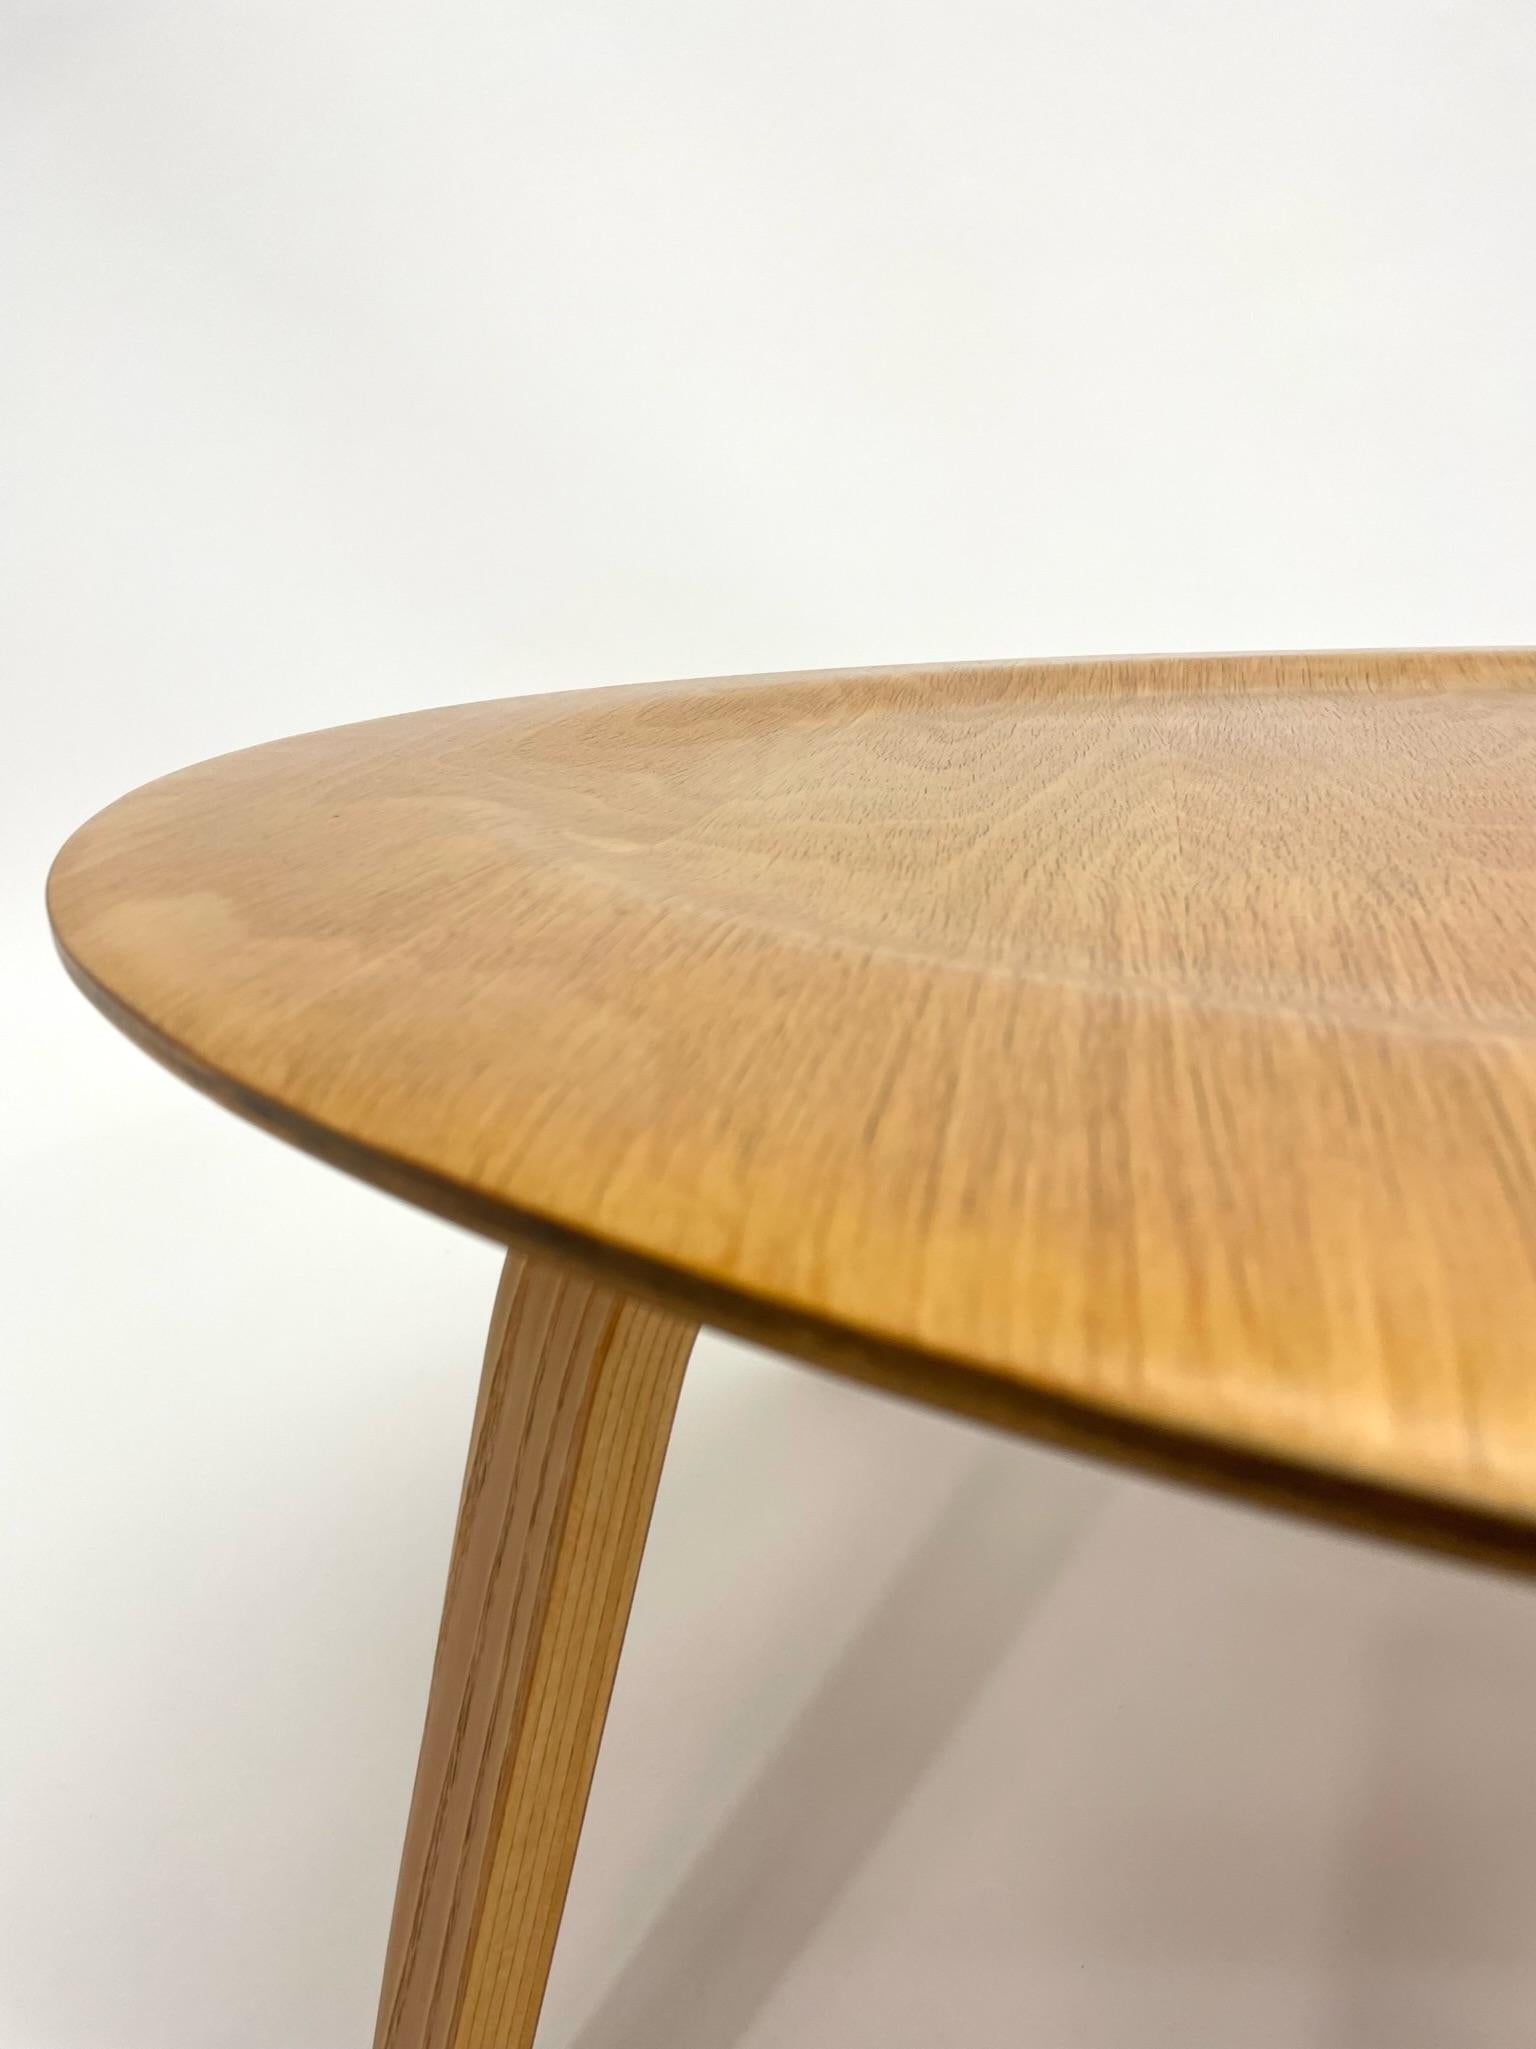 American Eames Ctw Coffee Table in Beech for Herman Miller, circa 1950